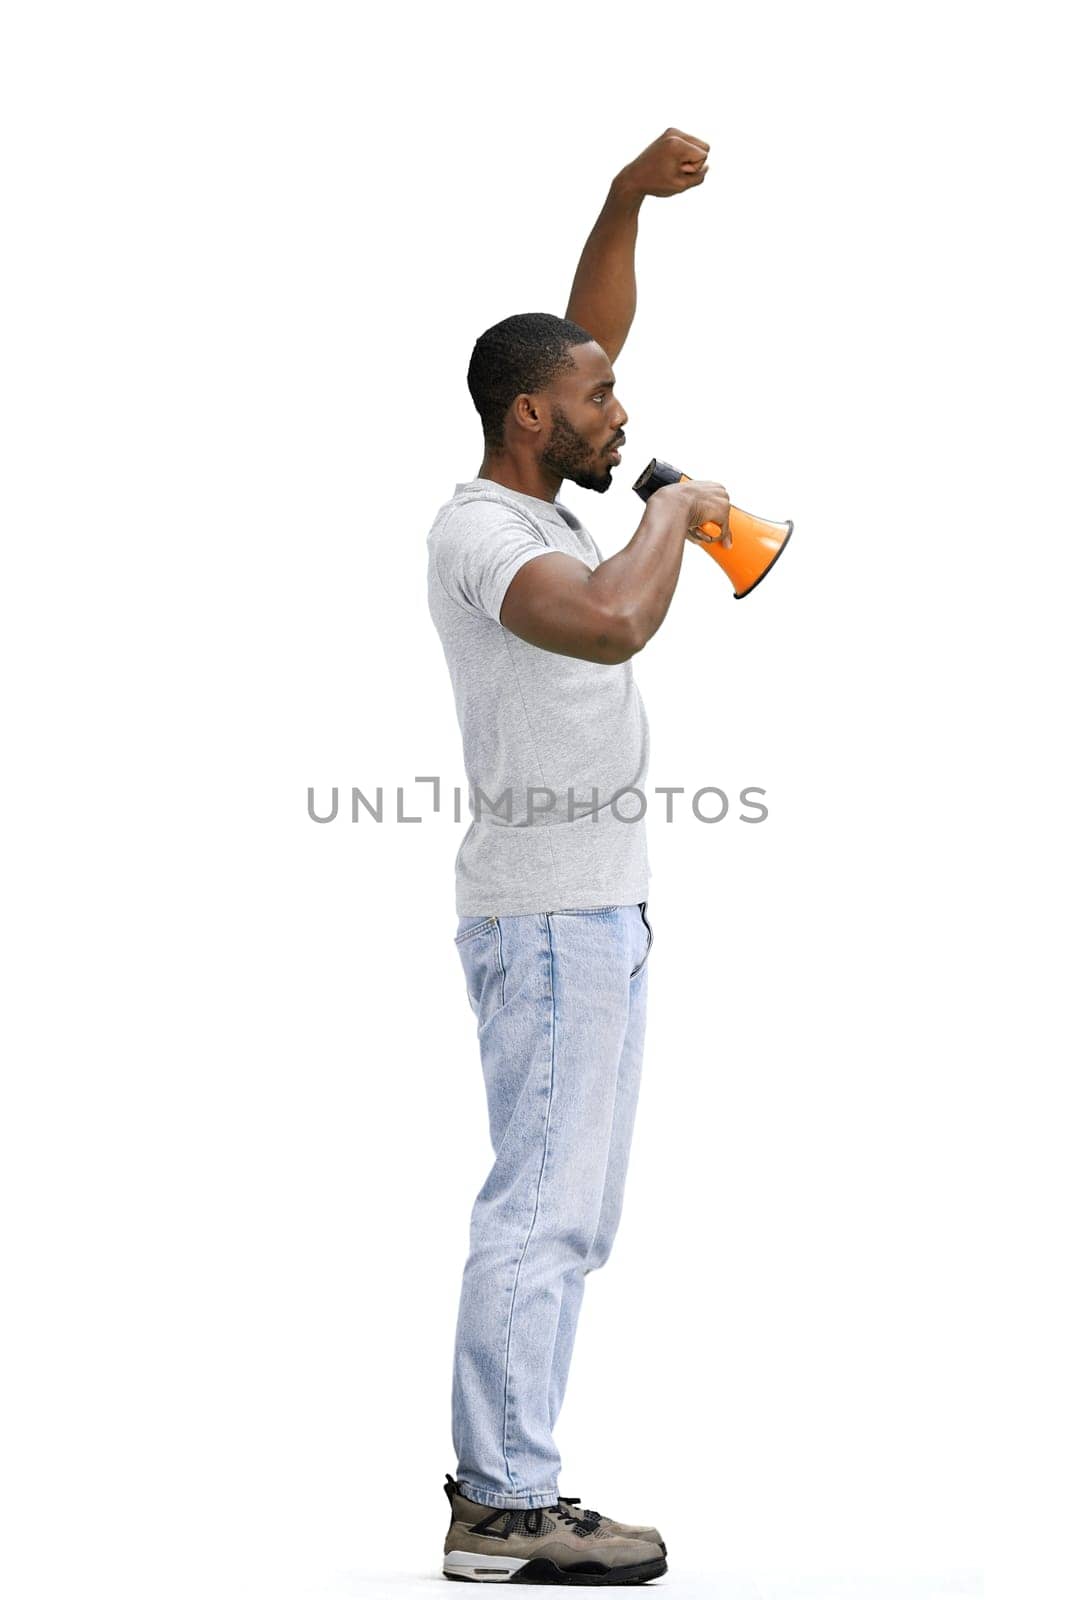 A man, full-length, on a white background, with a megaphone.